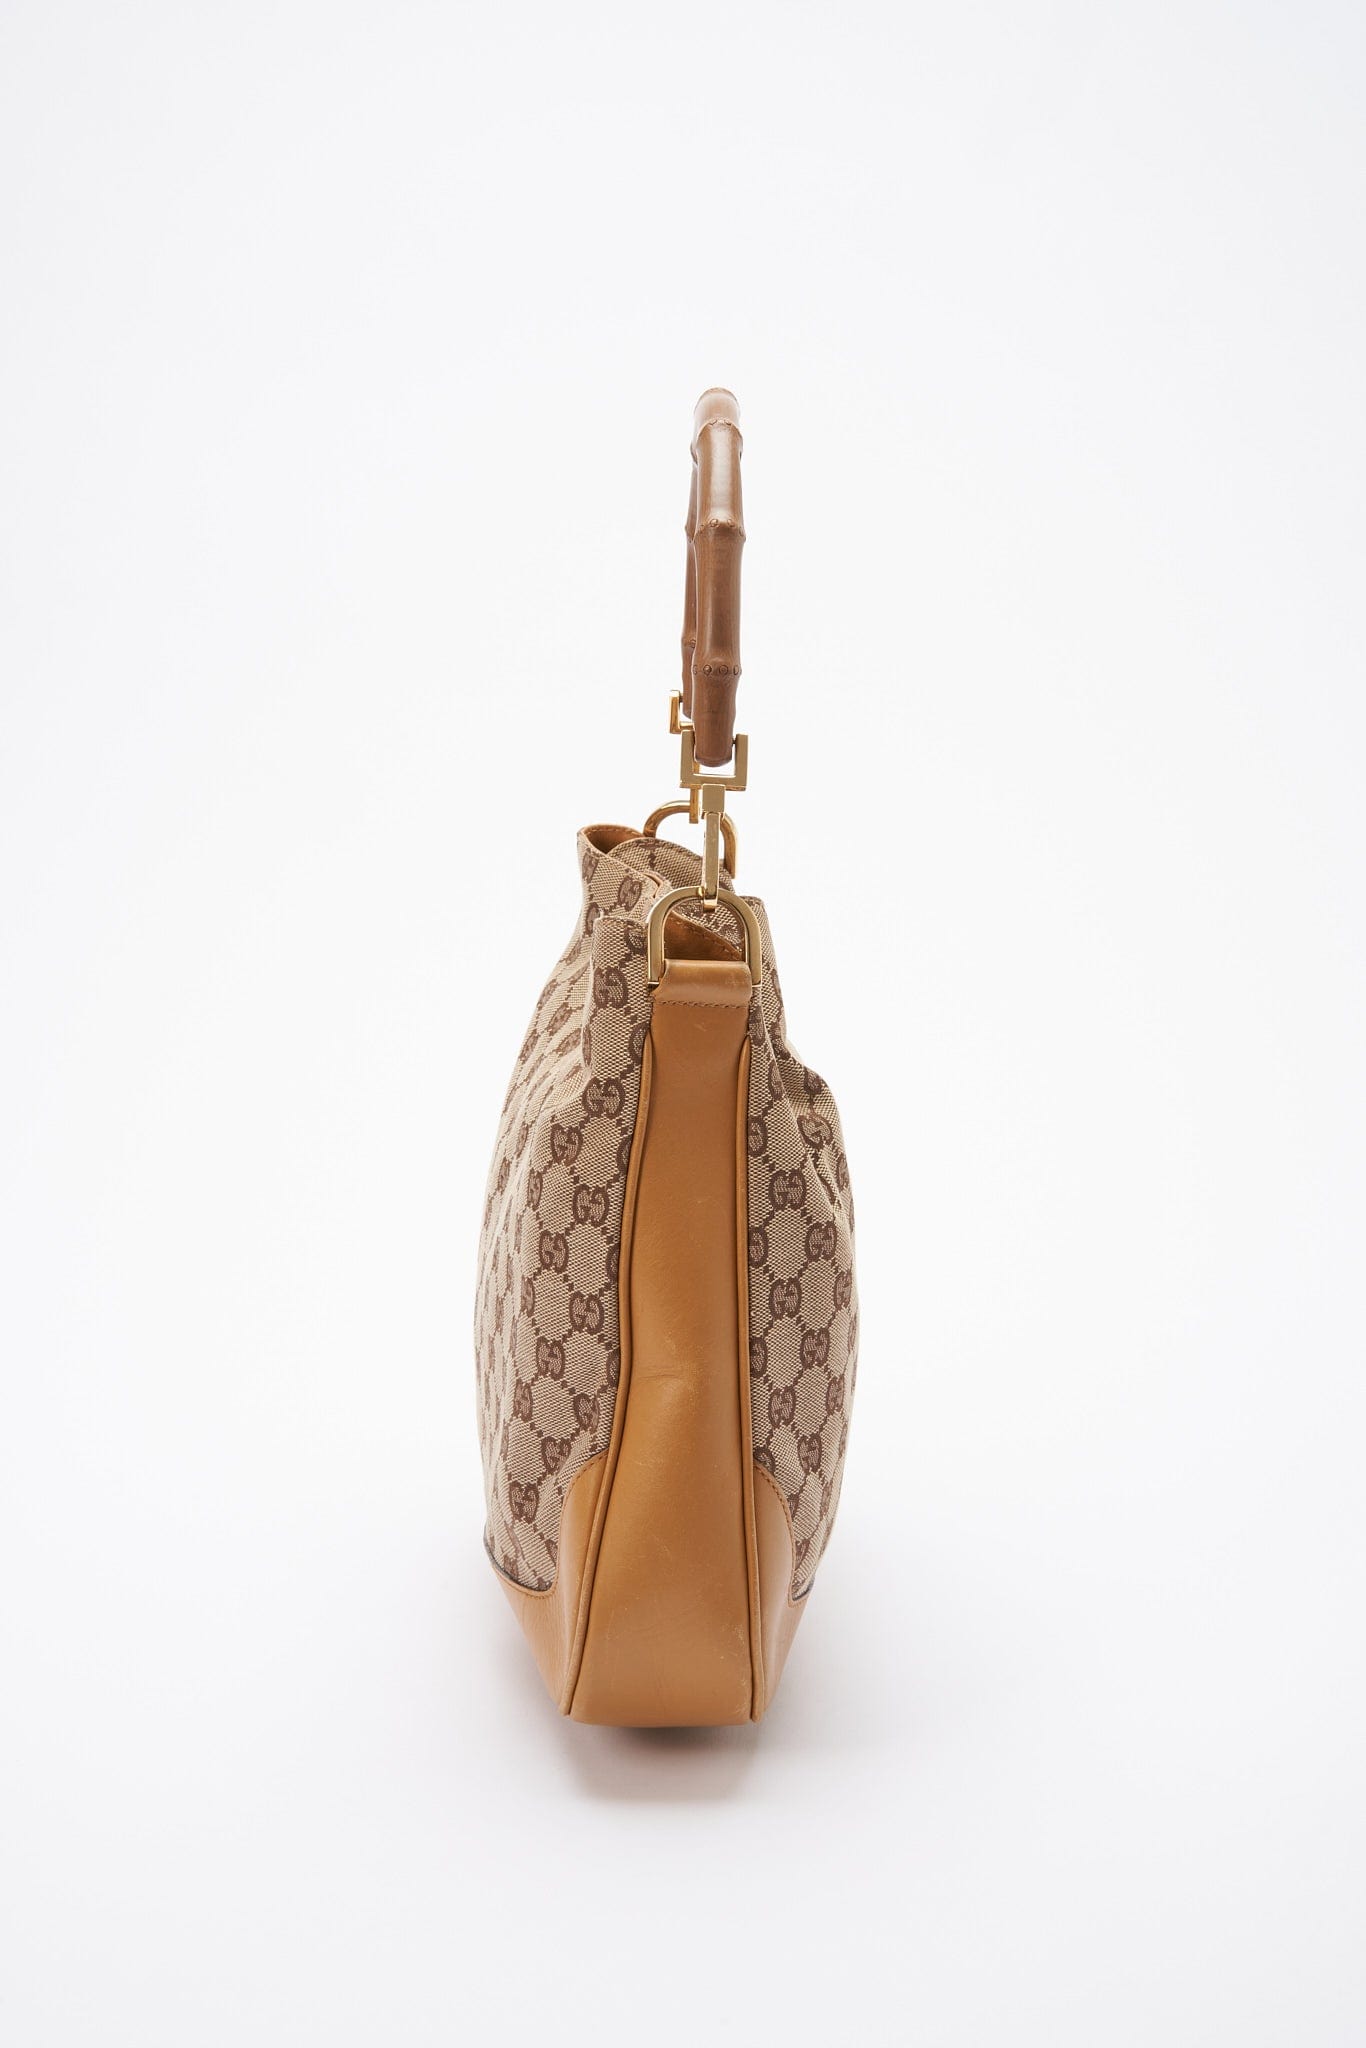 Vintage Gucci Bag with Bamboo Handle - Beige Canvas – The Hosta